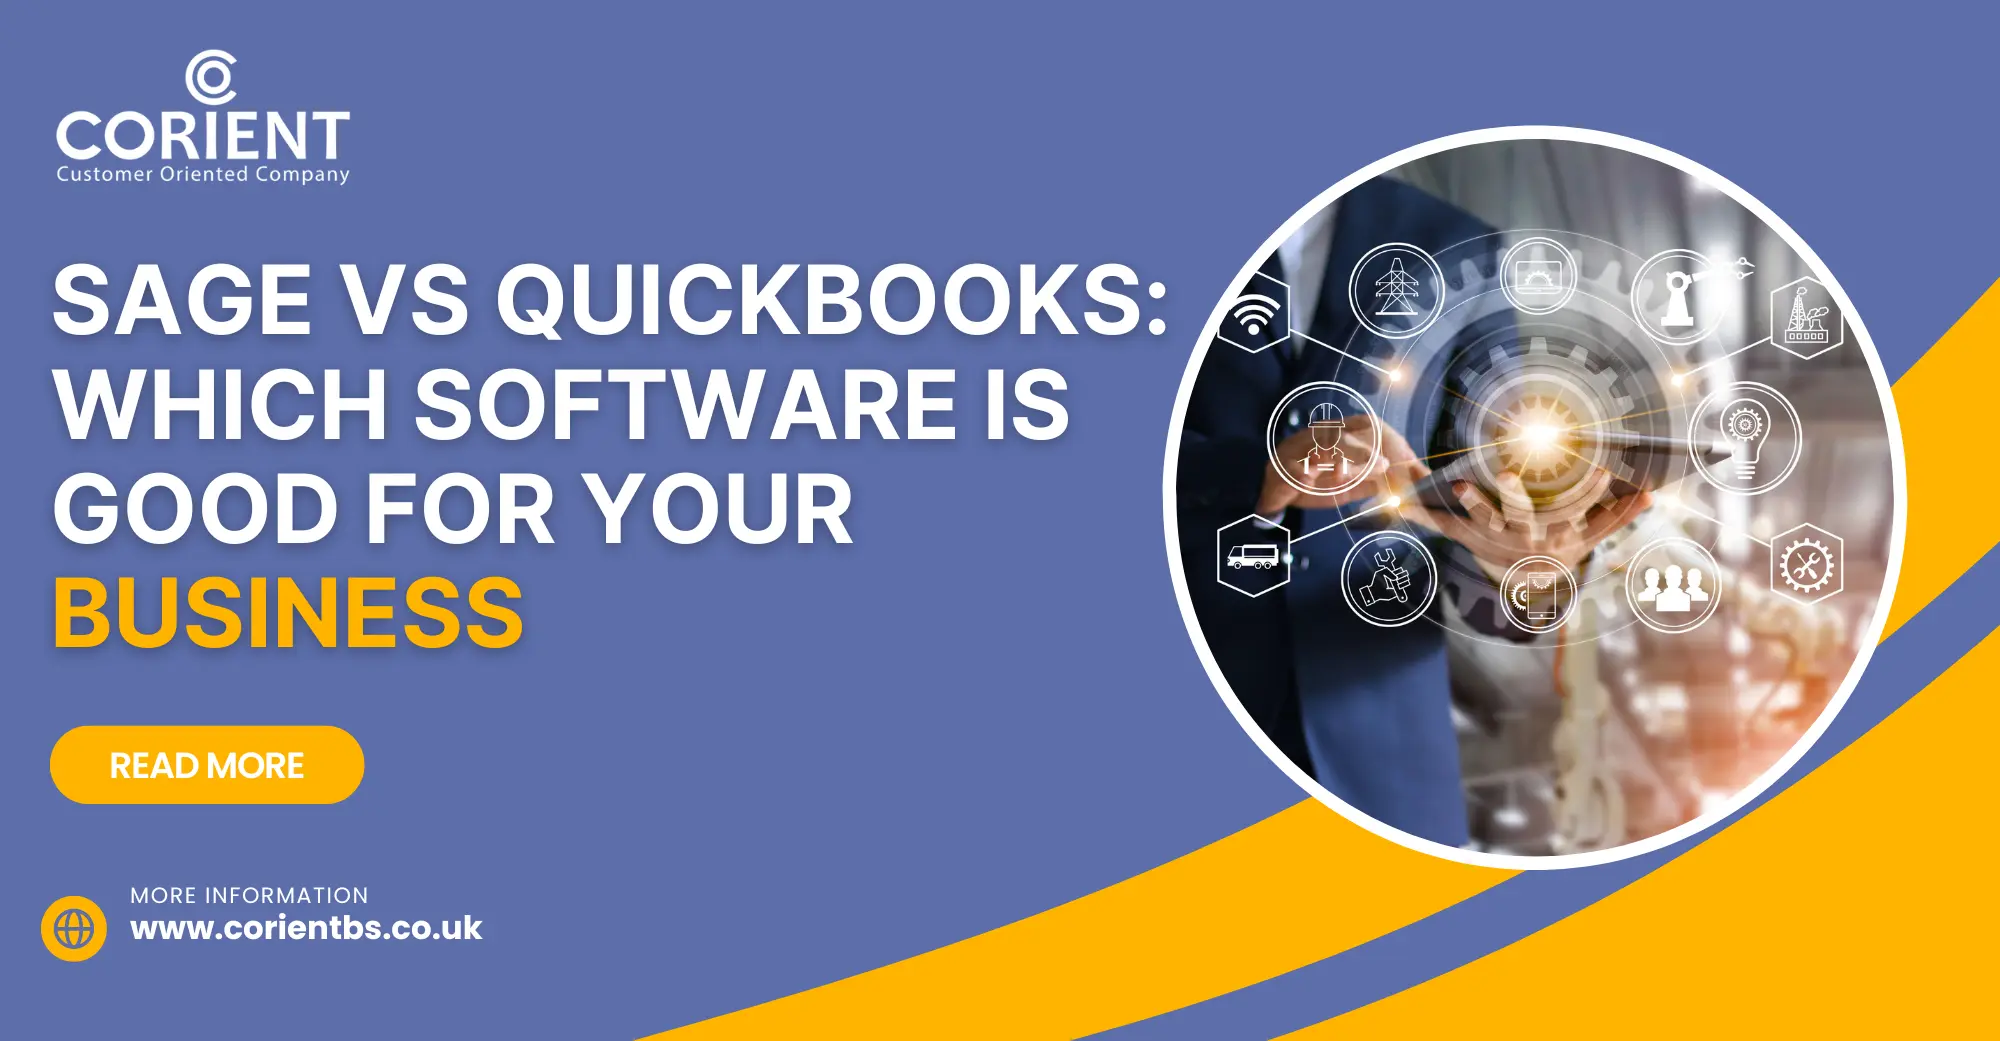 Sage Vs Quickbooks: Which Software Is Good for Your Business?